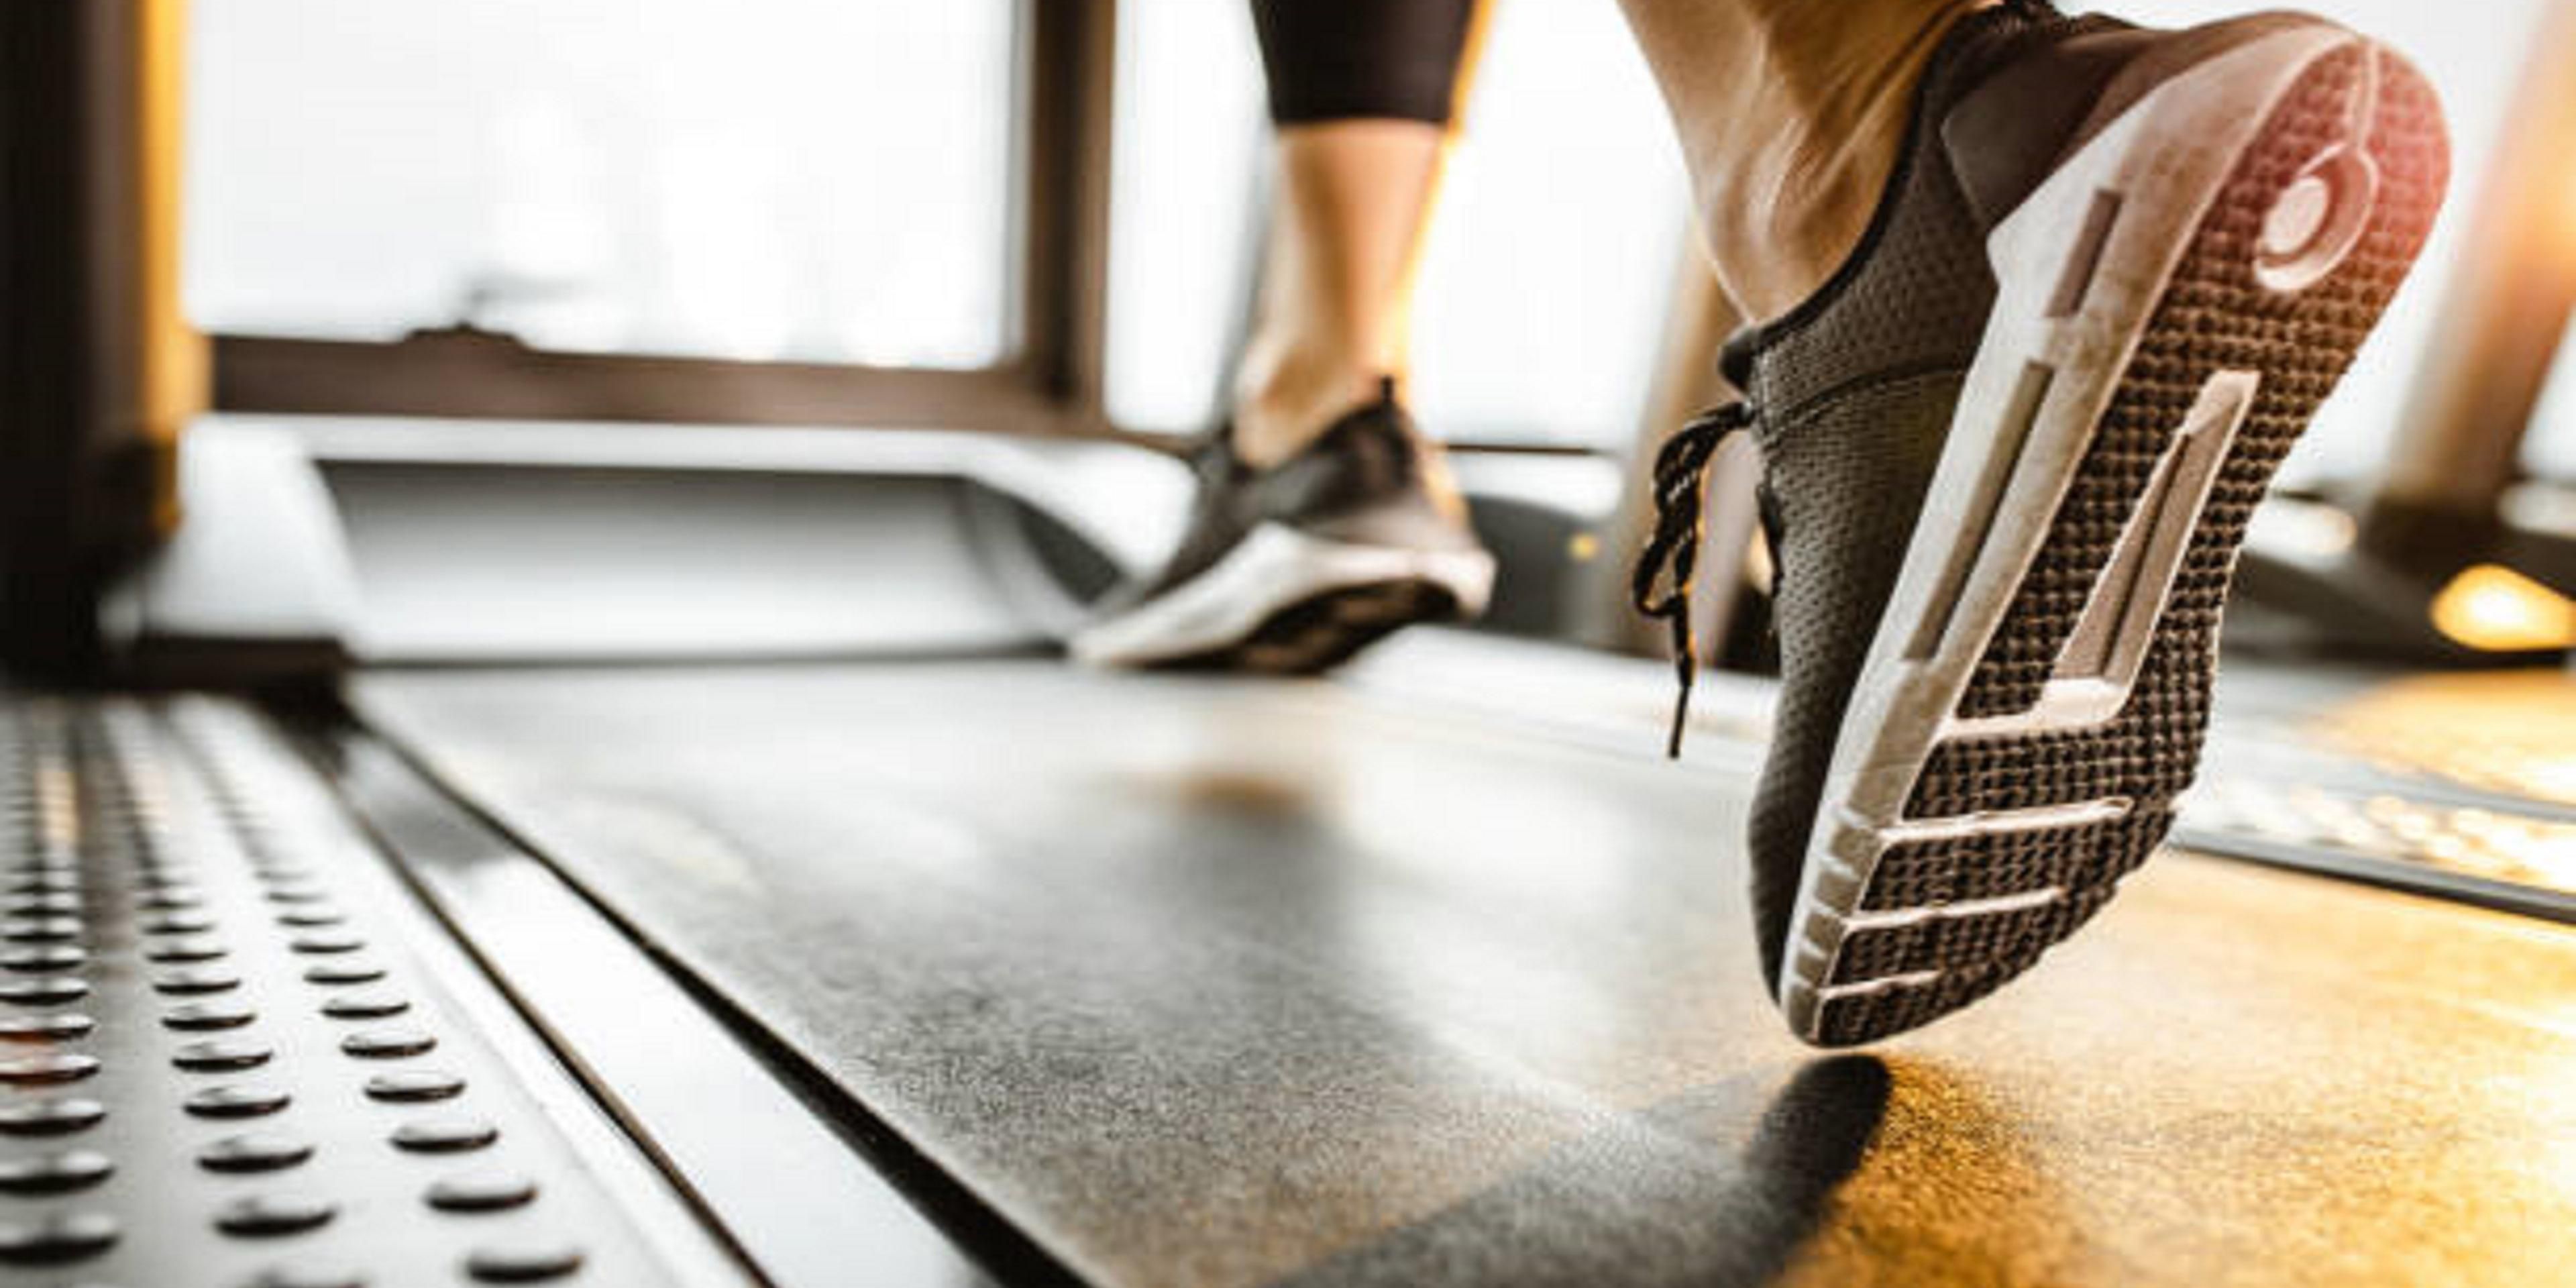 Get your sweat on in our complimentary, fully equipped fitness center with Free weights, Treadmill, Stationary Bicycle and elliptical machine open 24 hours.